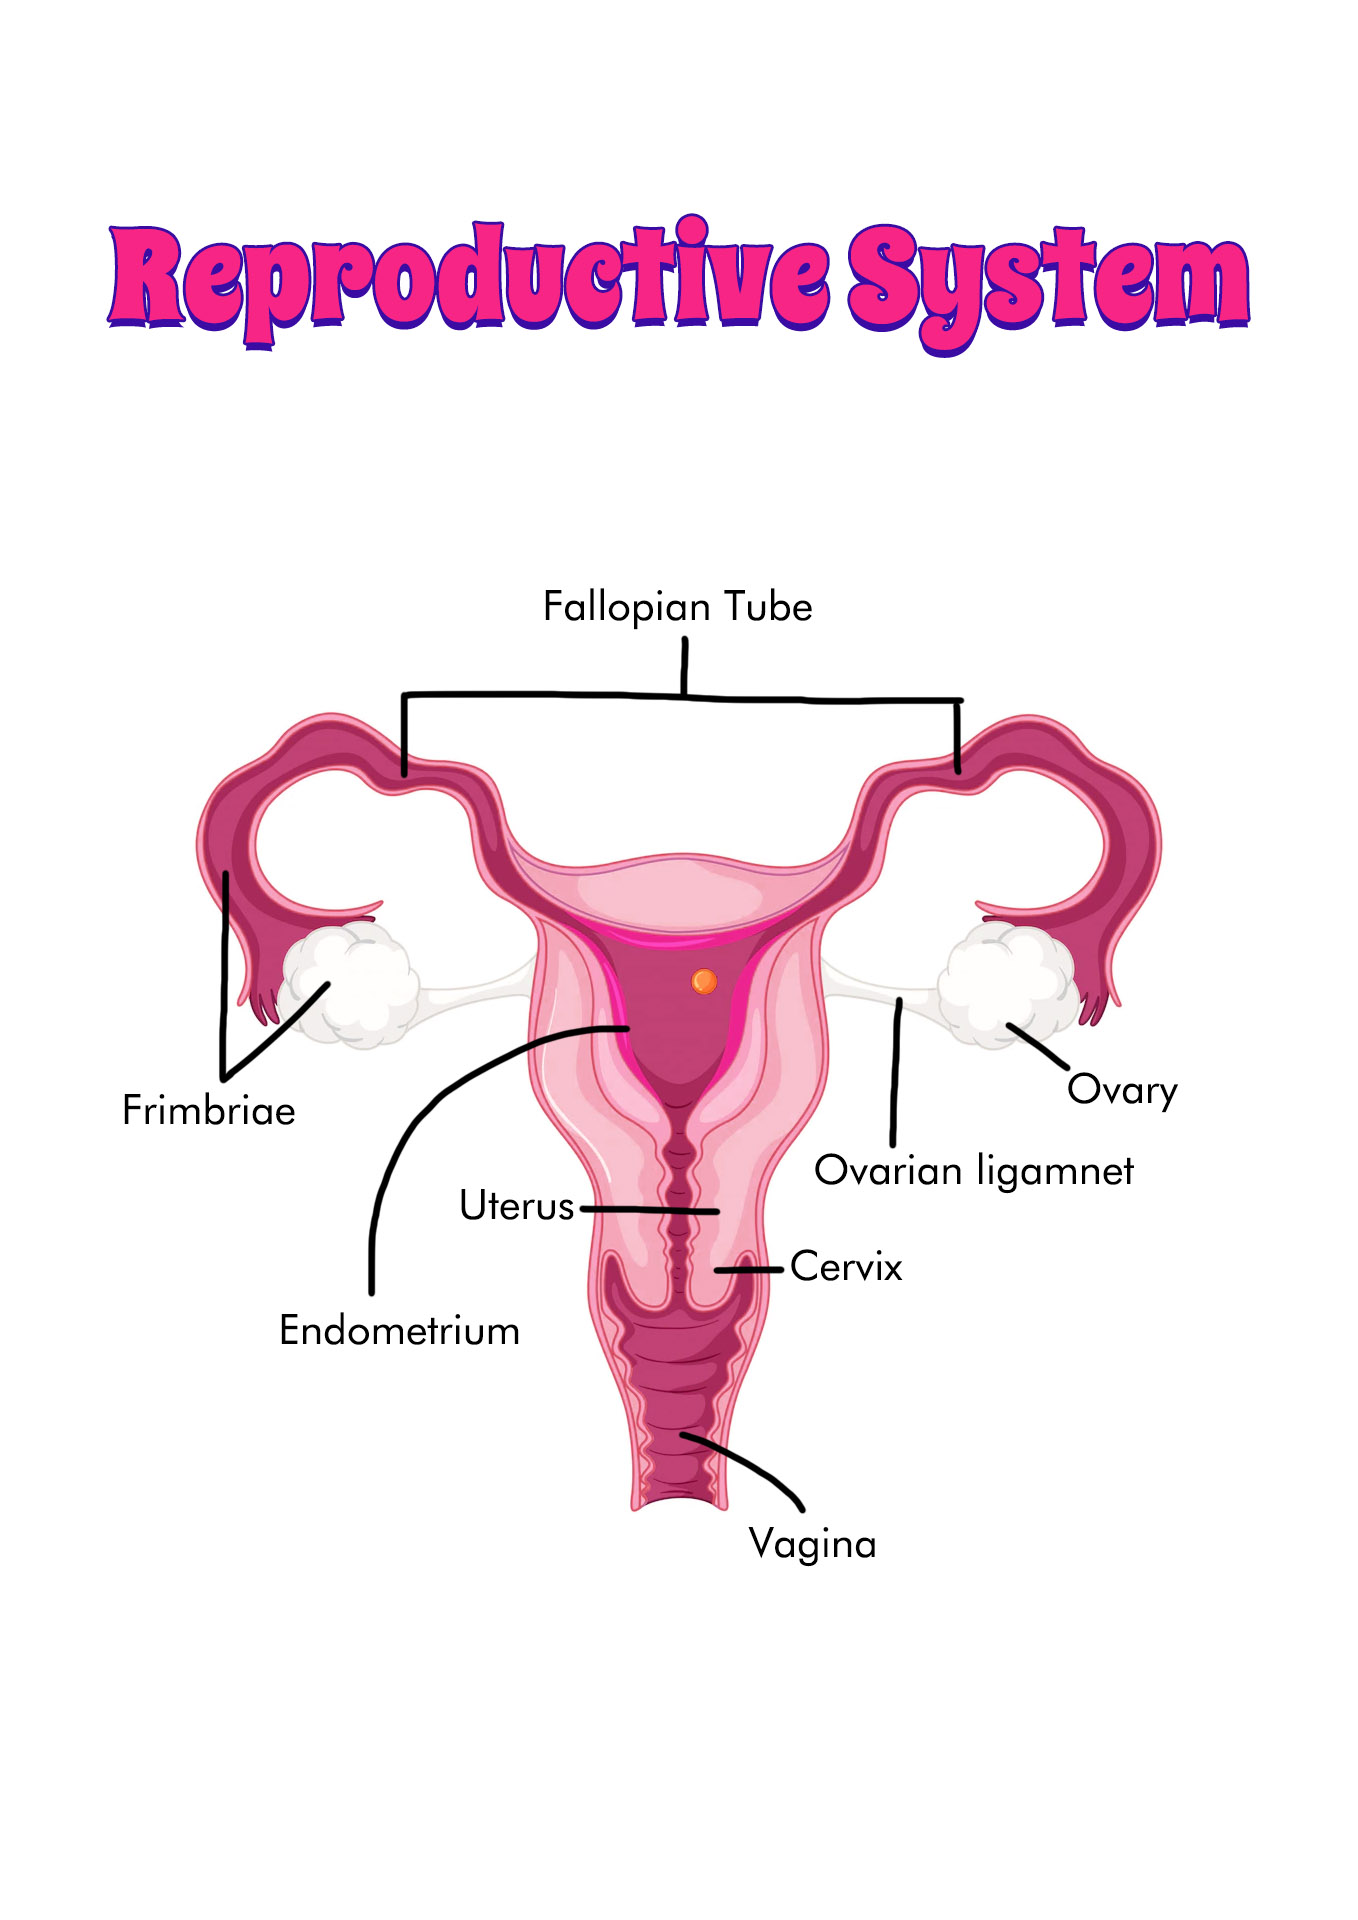 Reproductive System Organs and Functions Image